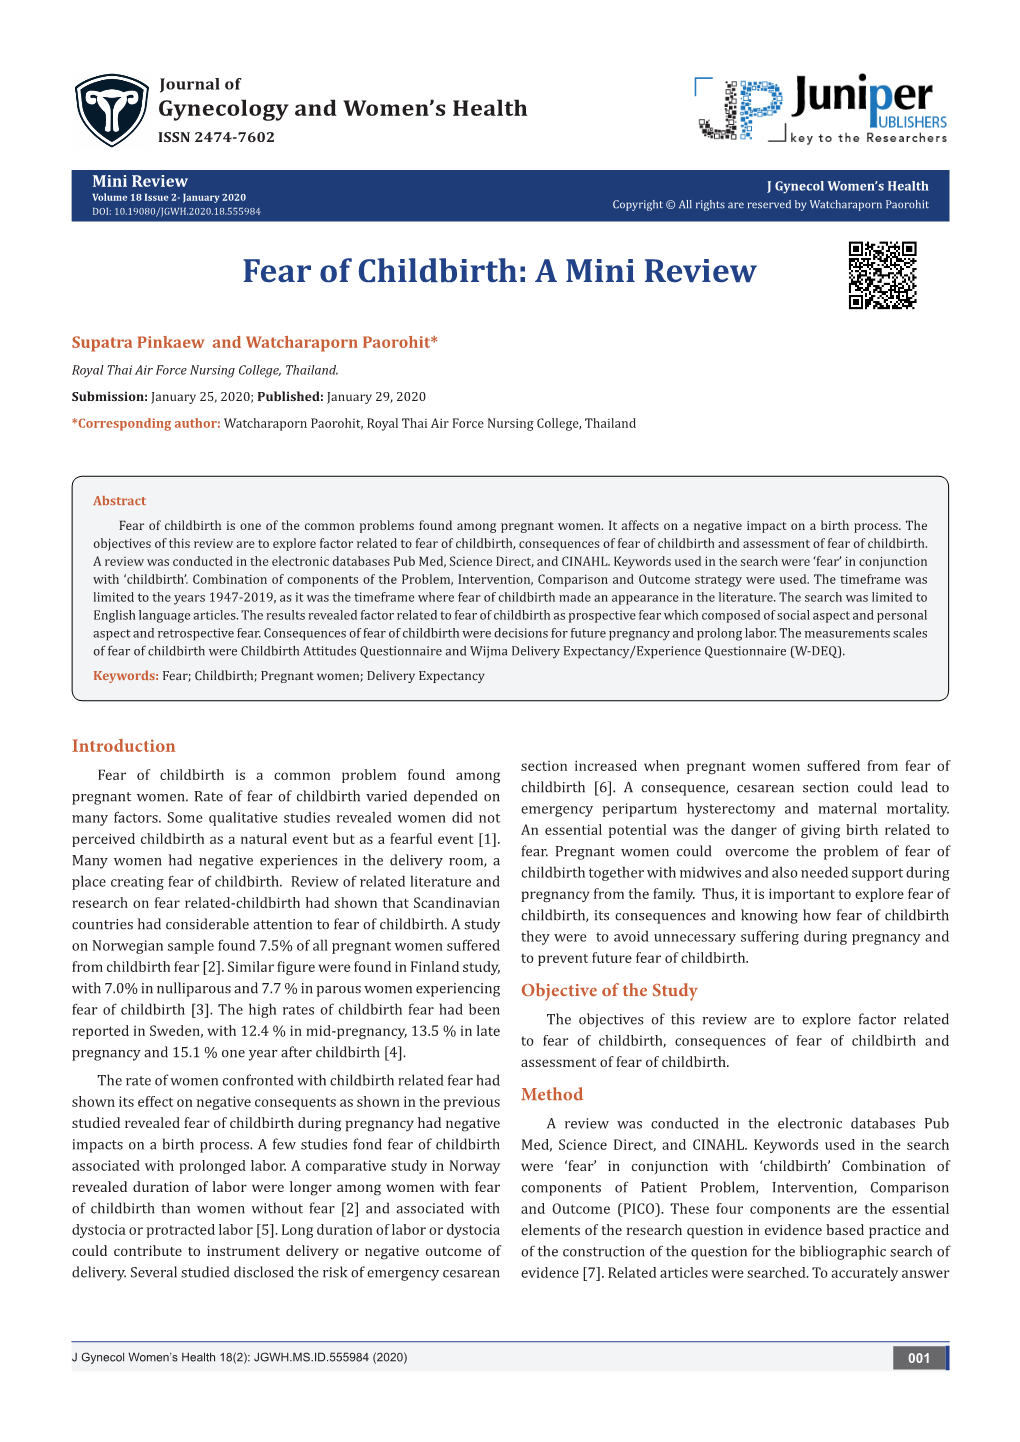 Fear of Childbirth: a Mini Review